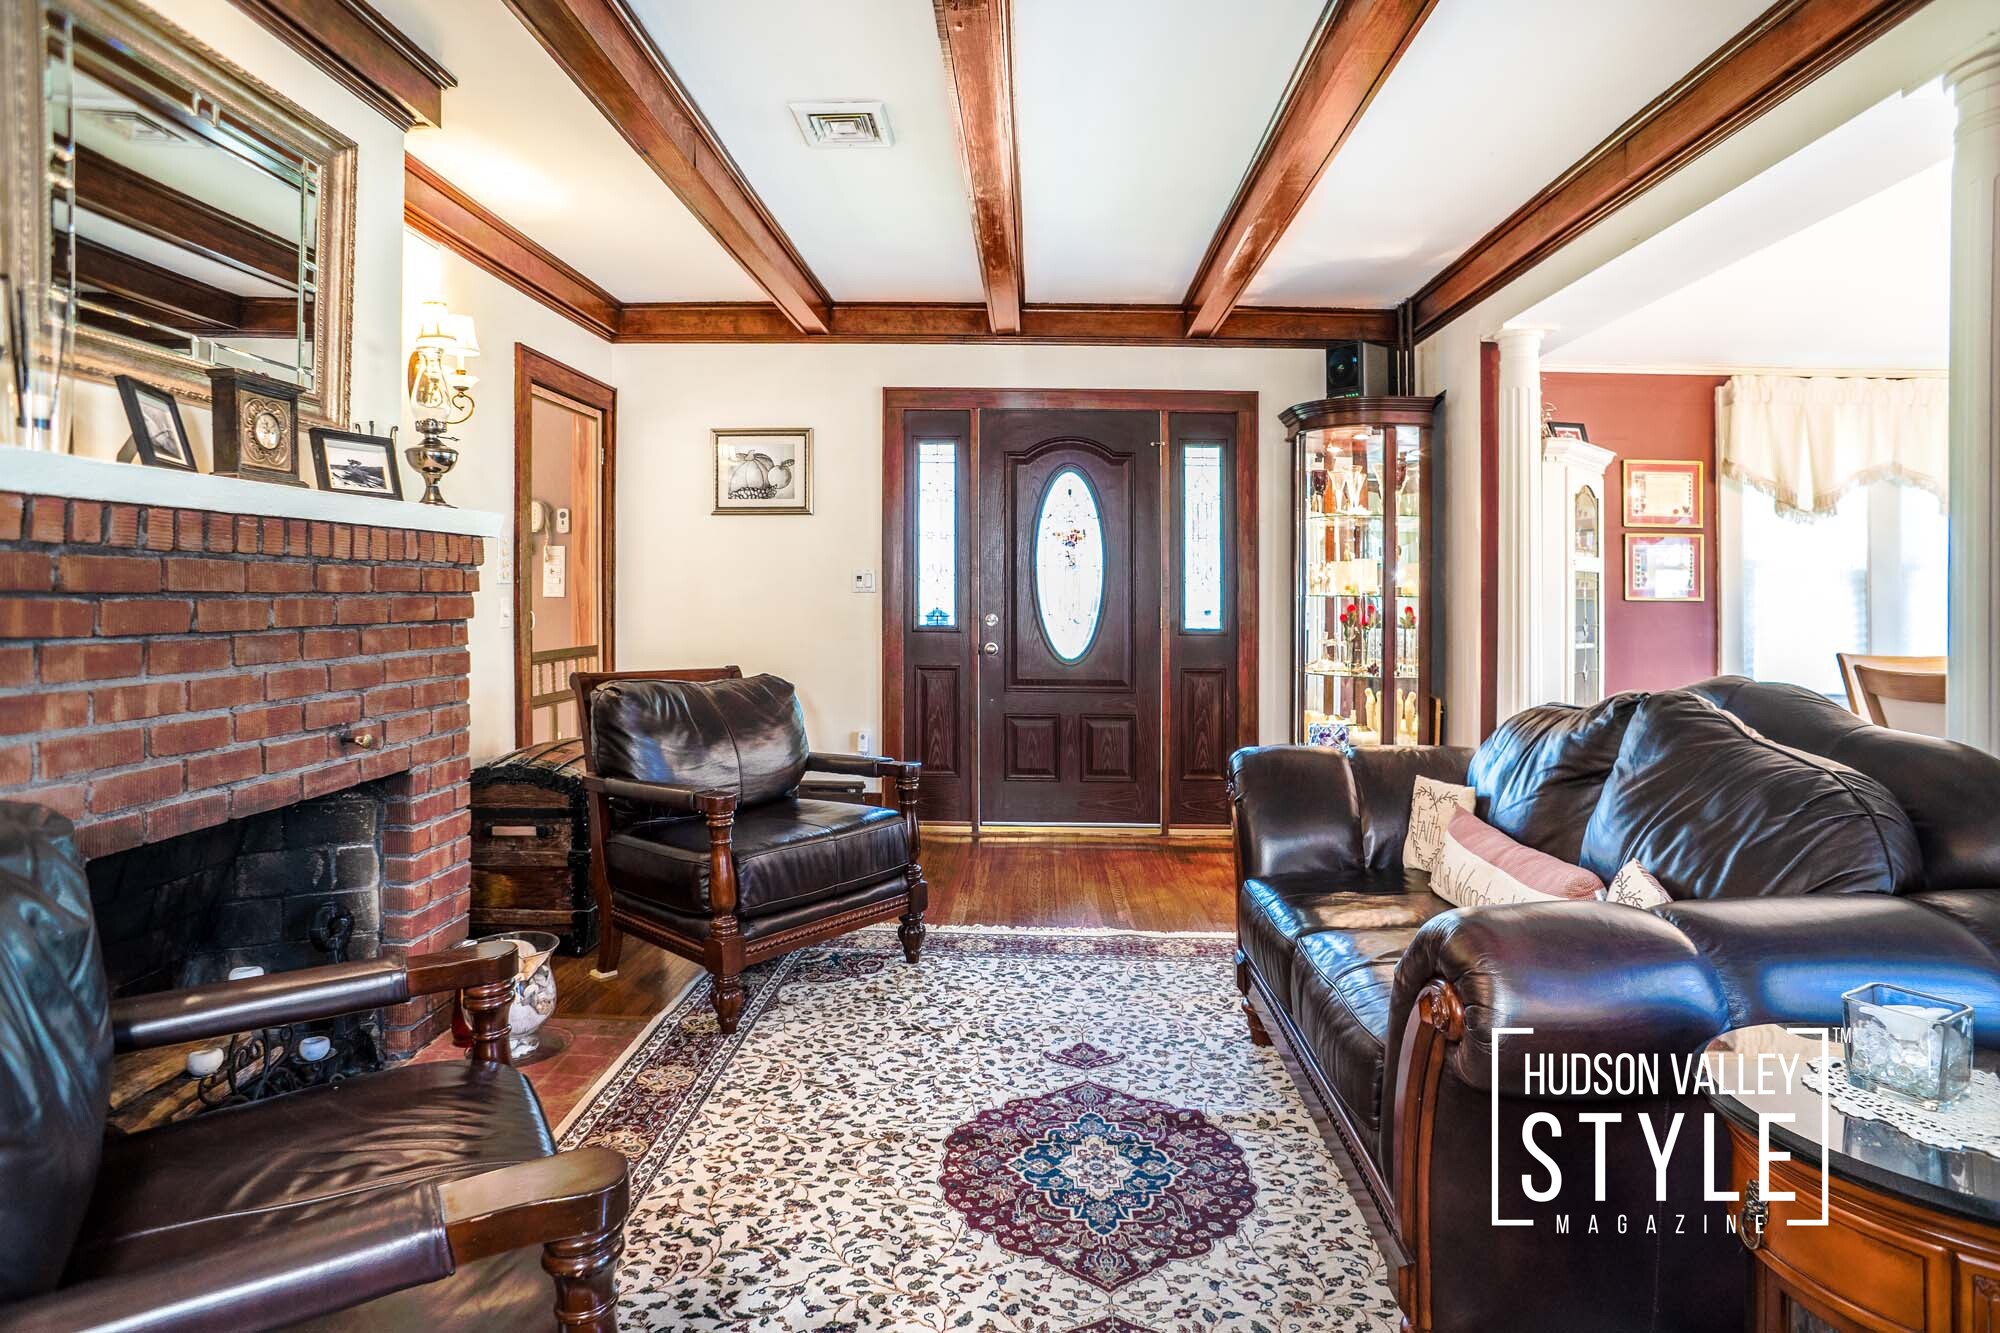 Beautiful and Cozy Hudson Valley Home for Sale by Owner just a Block away from the Hudson River and Chelsea, NY Yacht Club – Real Estate Photography by Duncan Avenue 